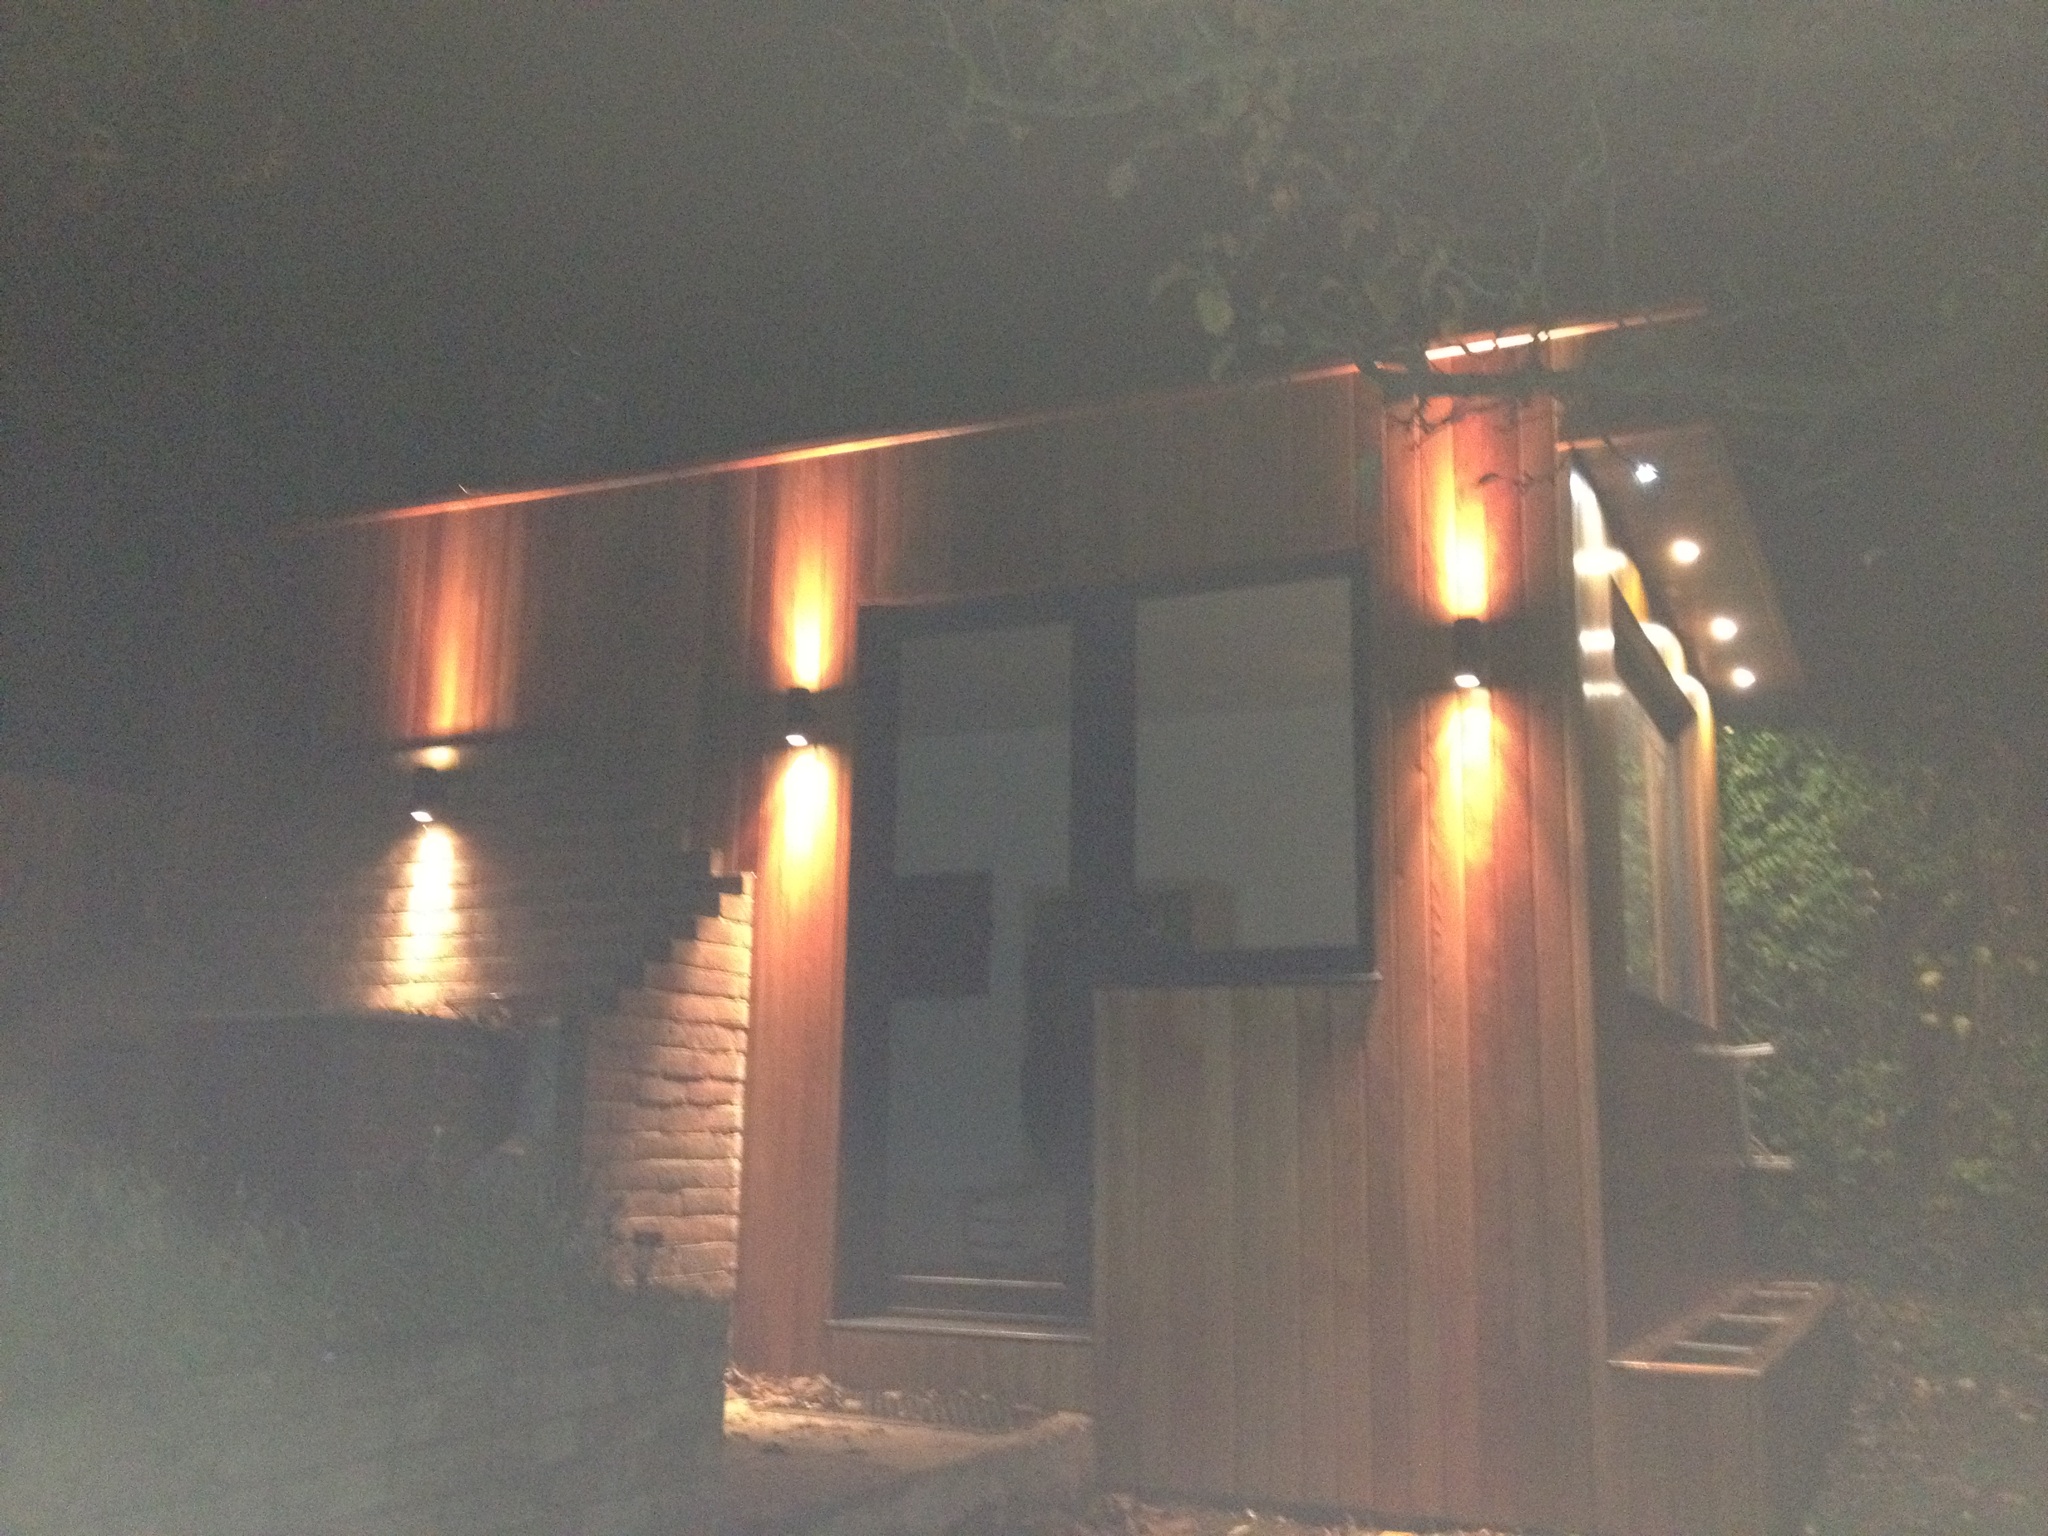 We can install outdoor lighting at your home